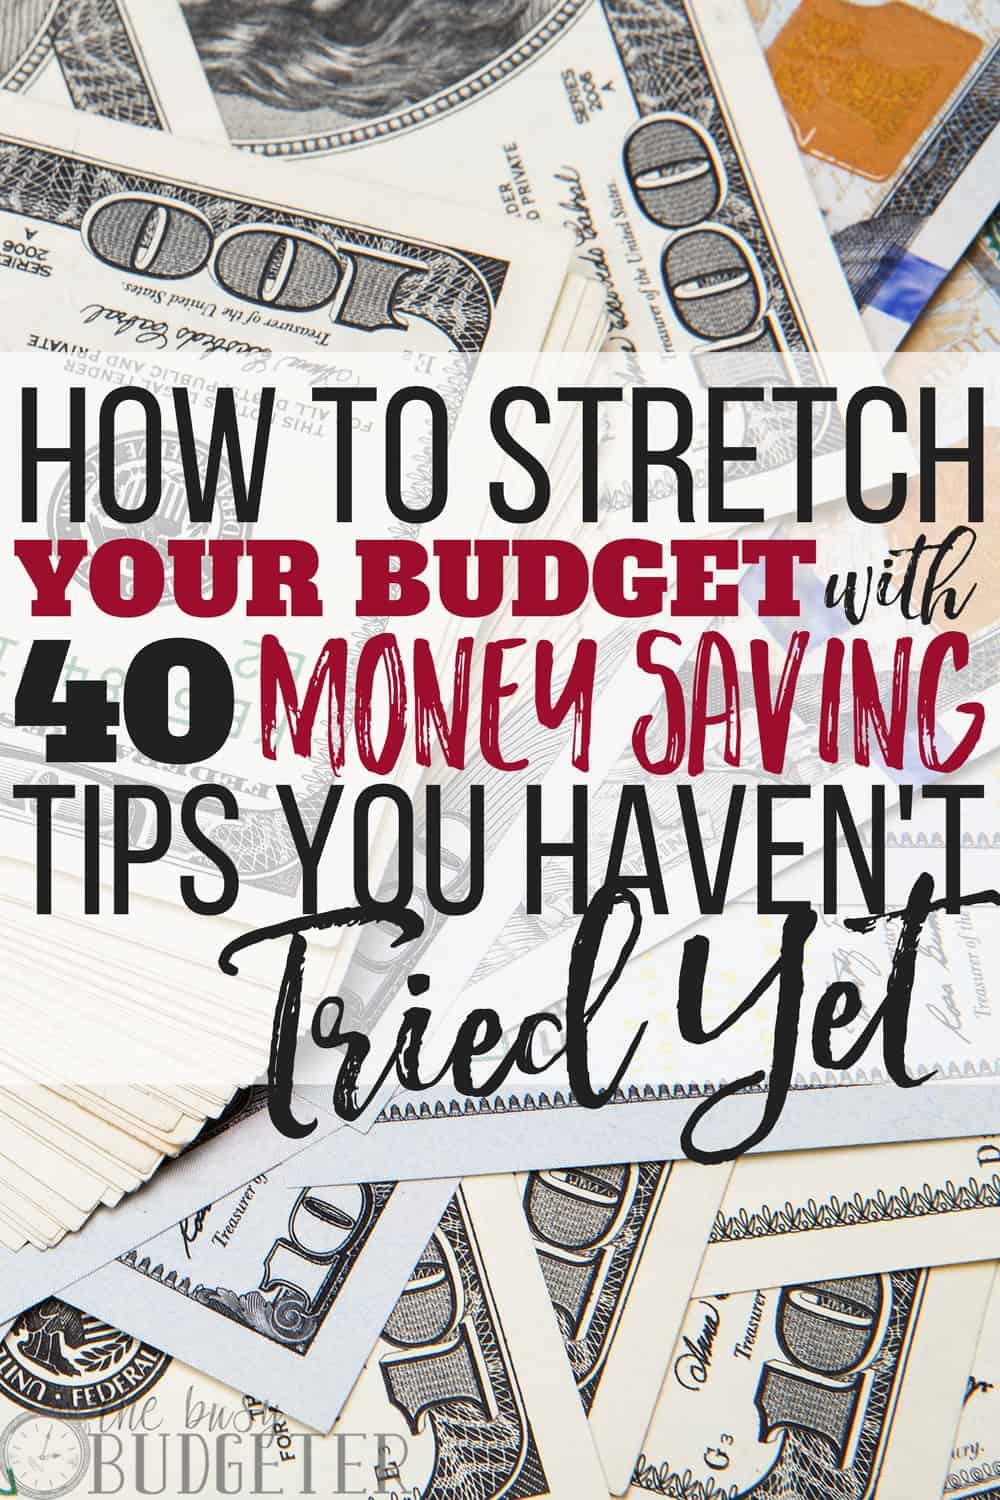 These tips not only help us stretch our budget every month but it also sets us up for saving money and having money left over to throw in our savings account every single week! I get so overwhelmed with budgeting but these money saving tips are easy to implement and easy to stick to-- win win!! If you're trying to stretch your budget, I can't recommend trying these tips enough!